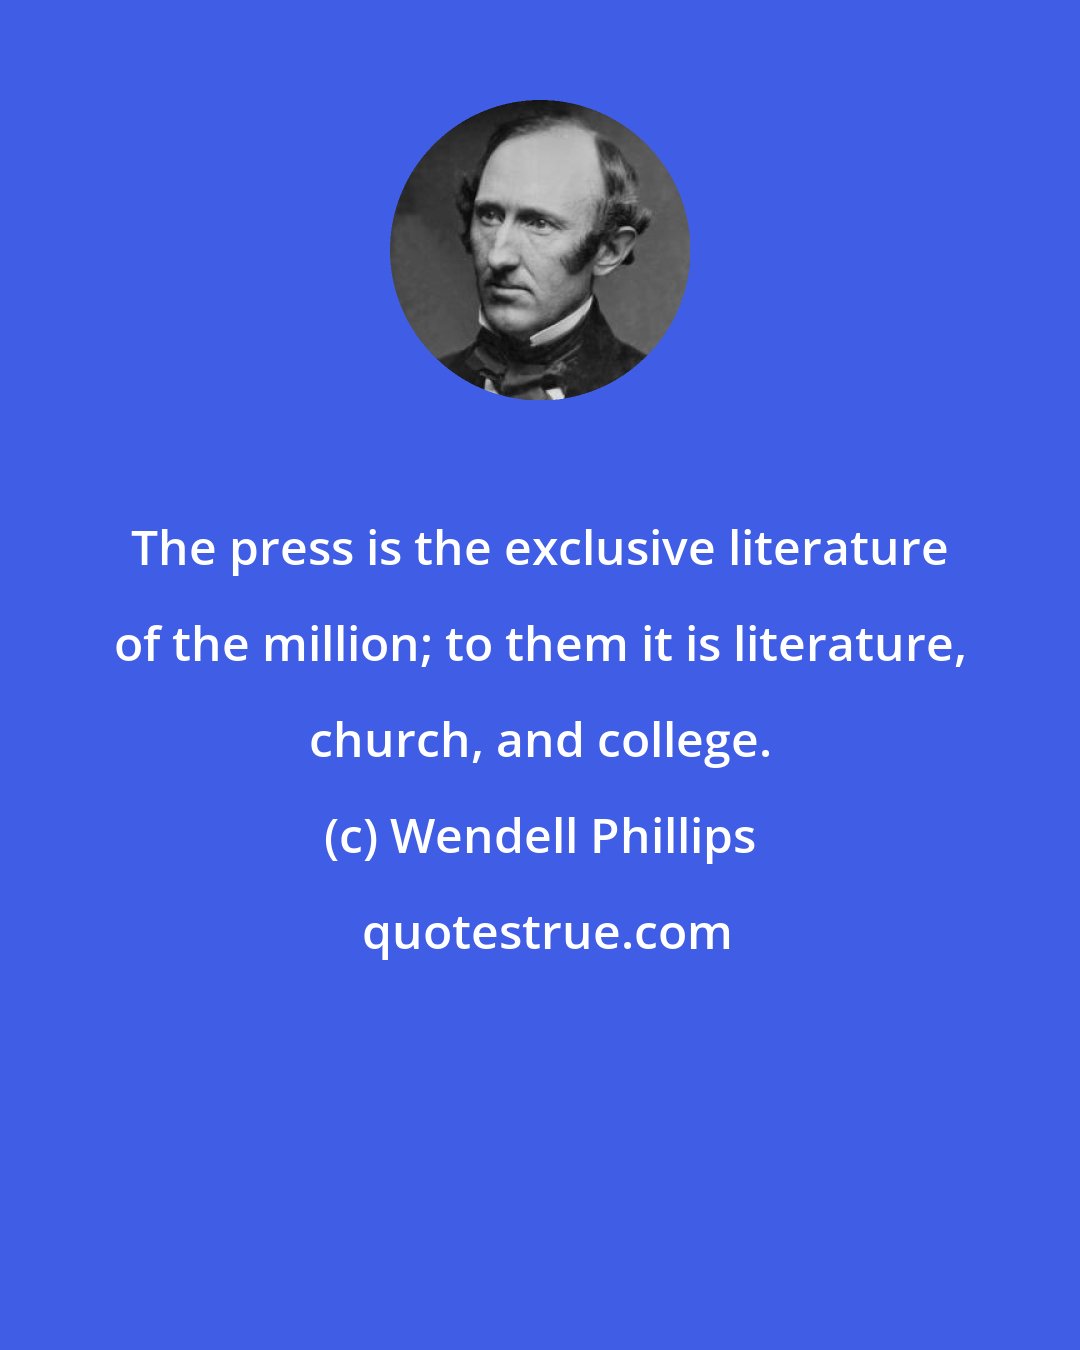 Wendell Phillips: The press is the exclusive literature of the million; to them it is literature, church, and college.